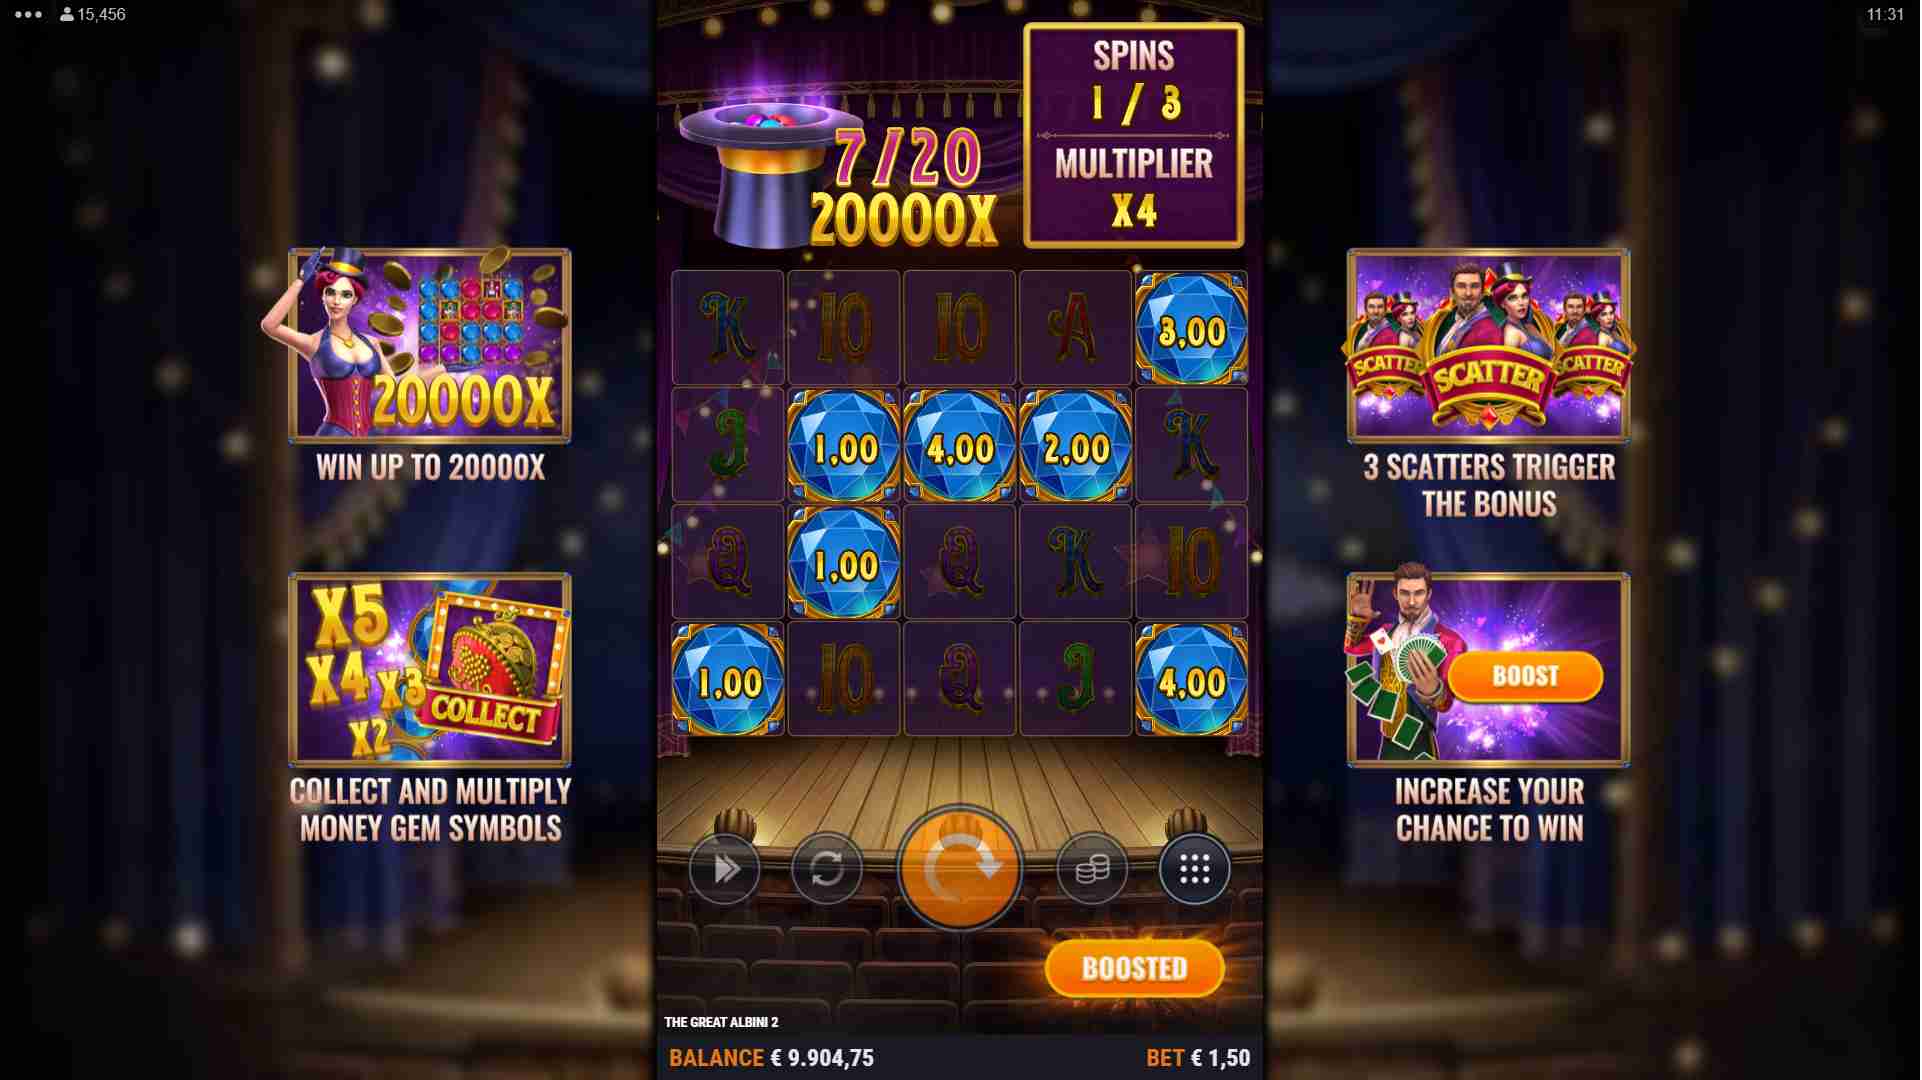 The Great Albini 2 Free Spins